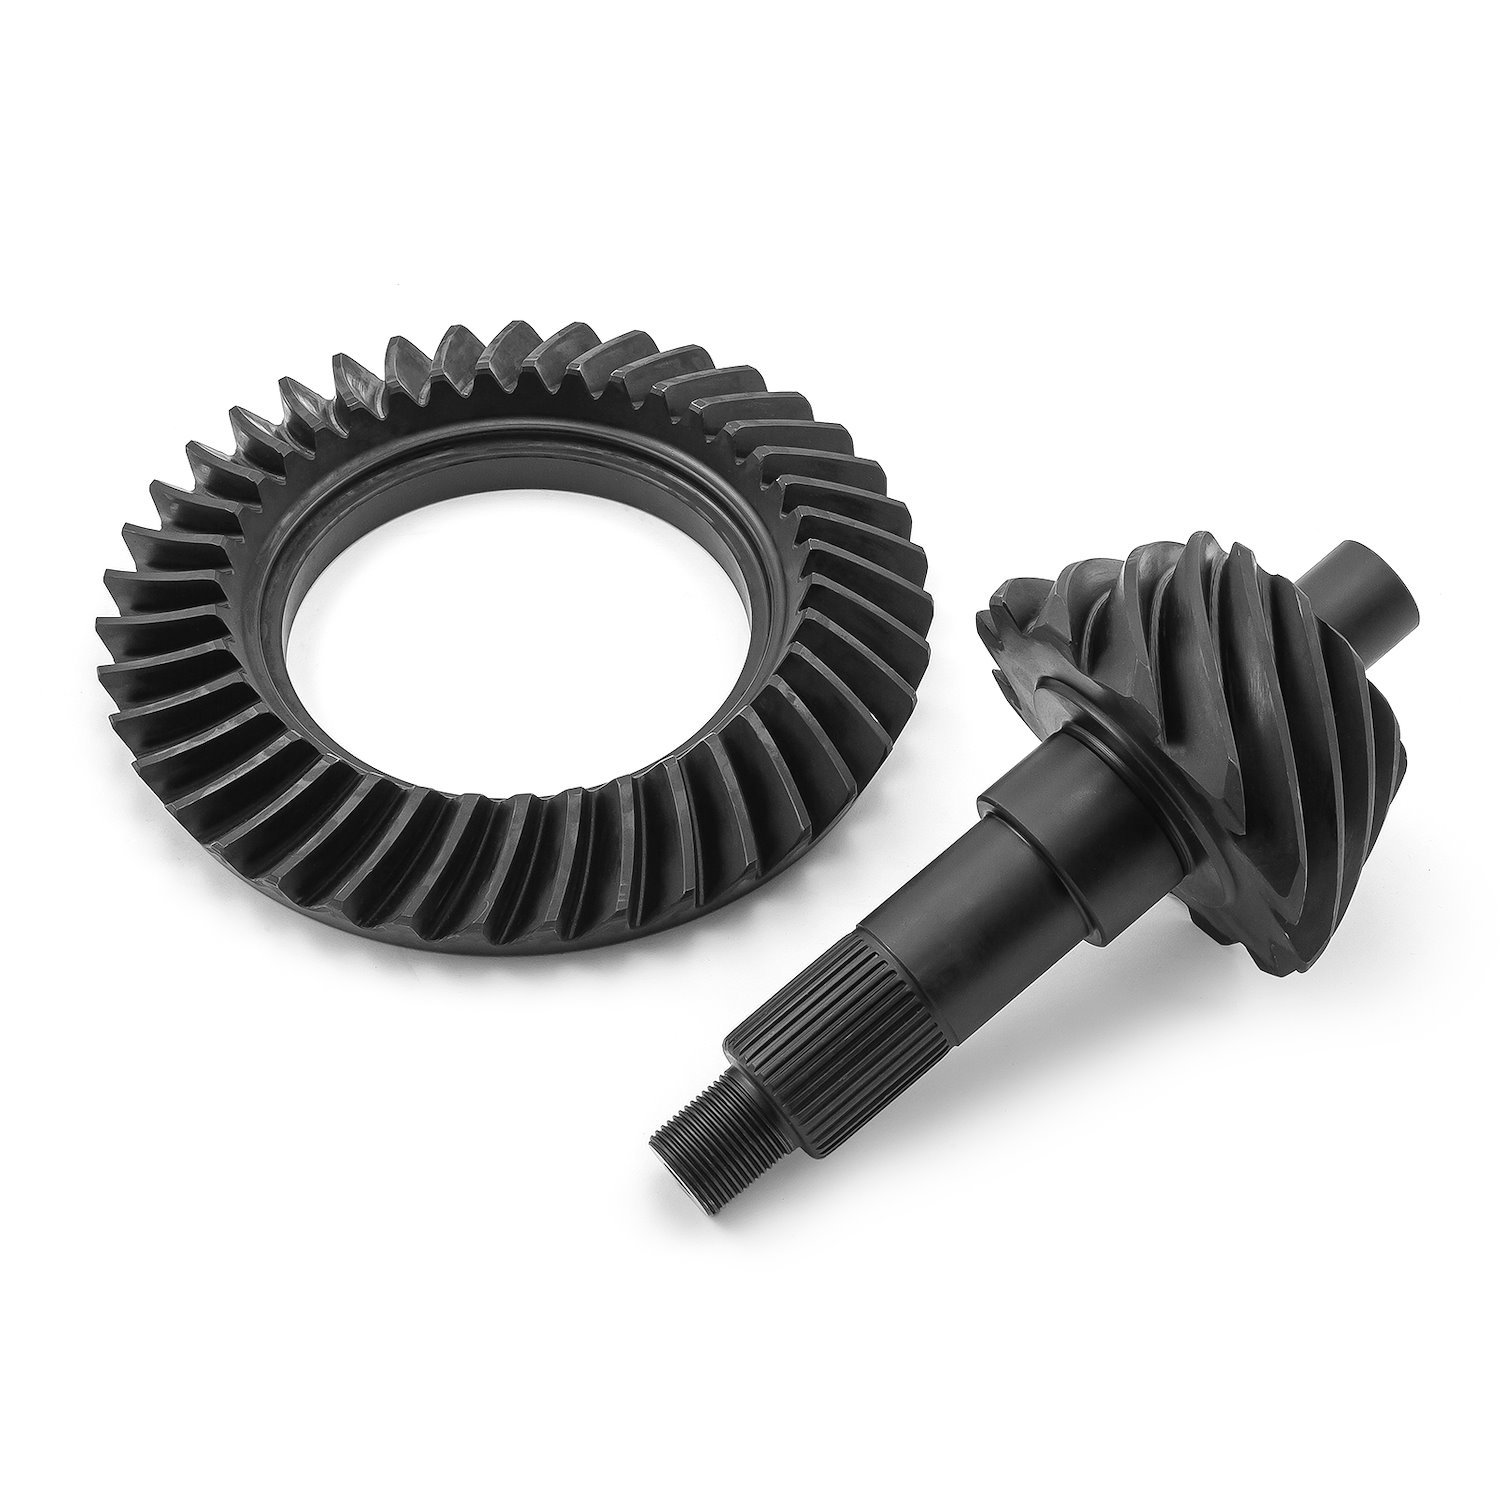 Ring and Pinion Set Ford 9 in., 35-spline, 4.30:1 Ratio